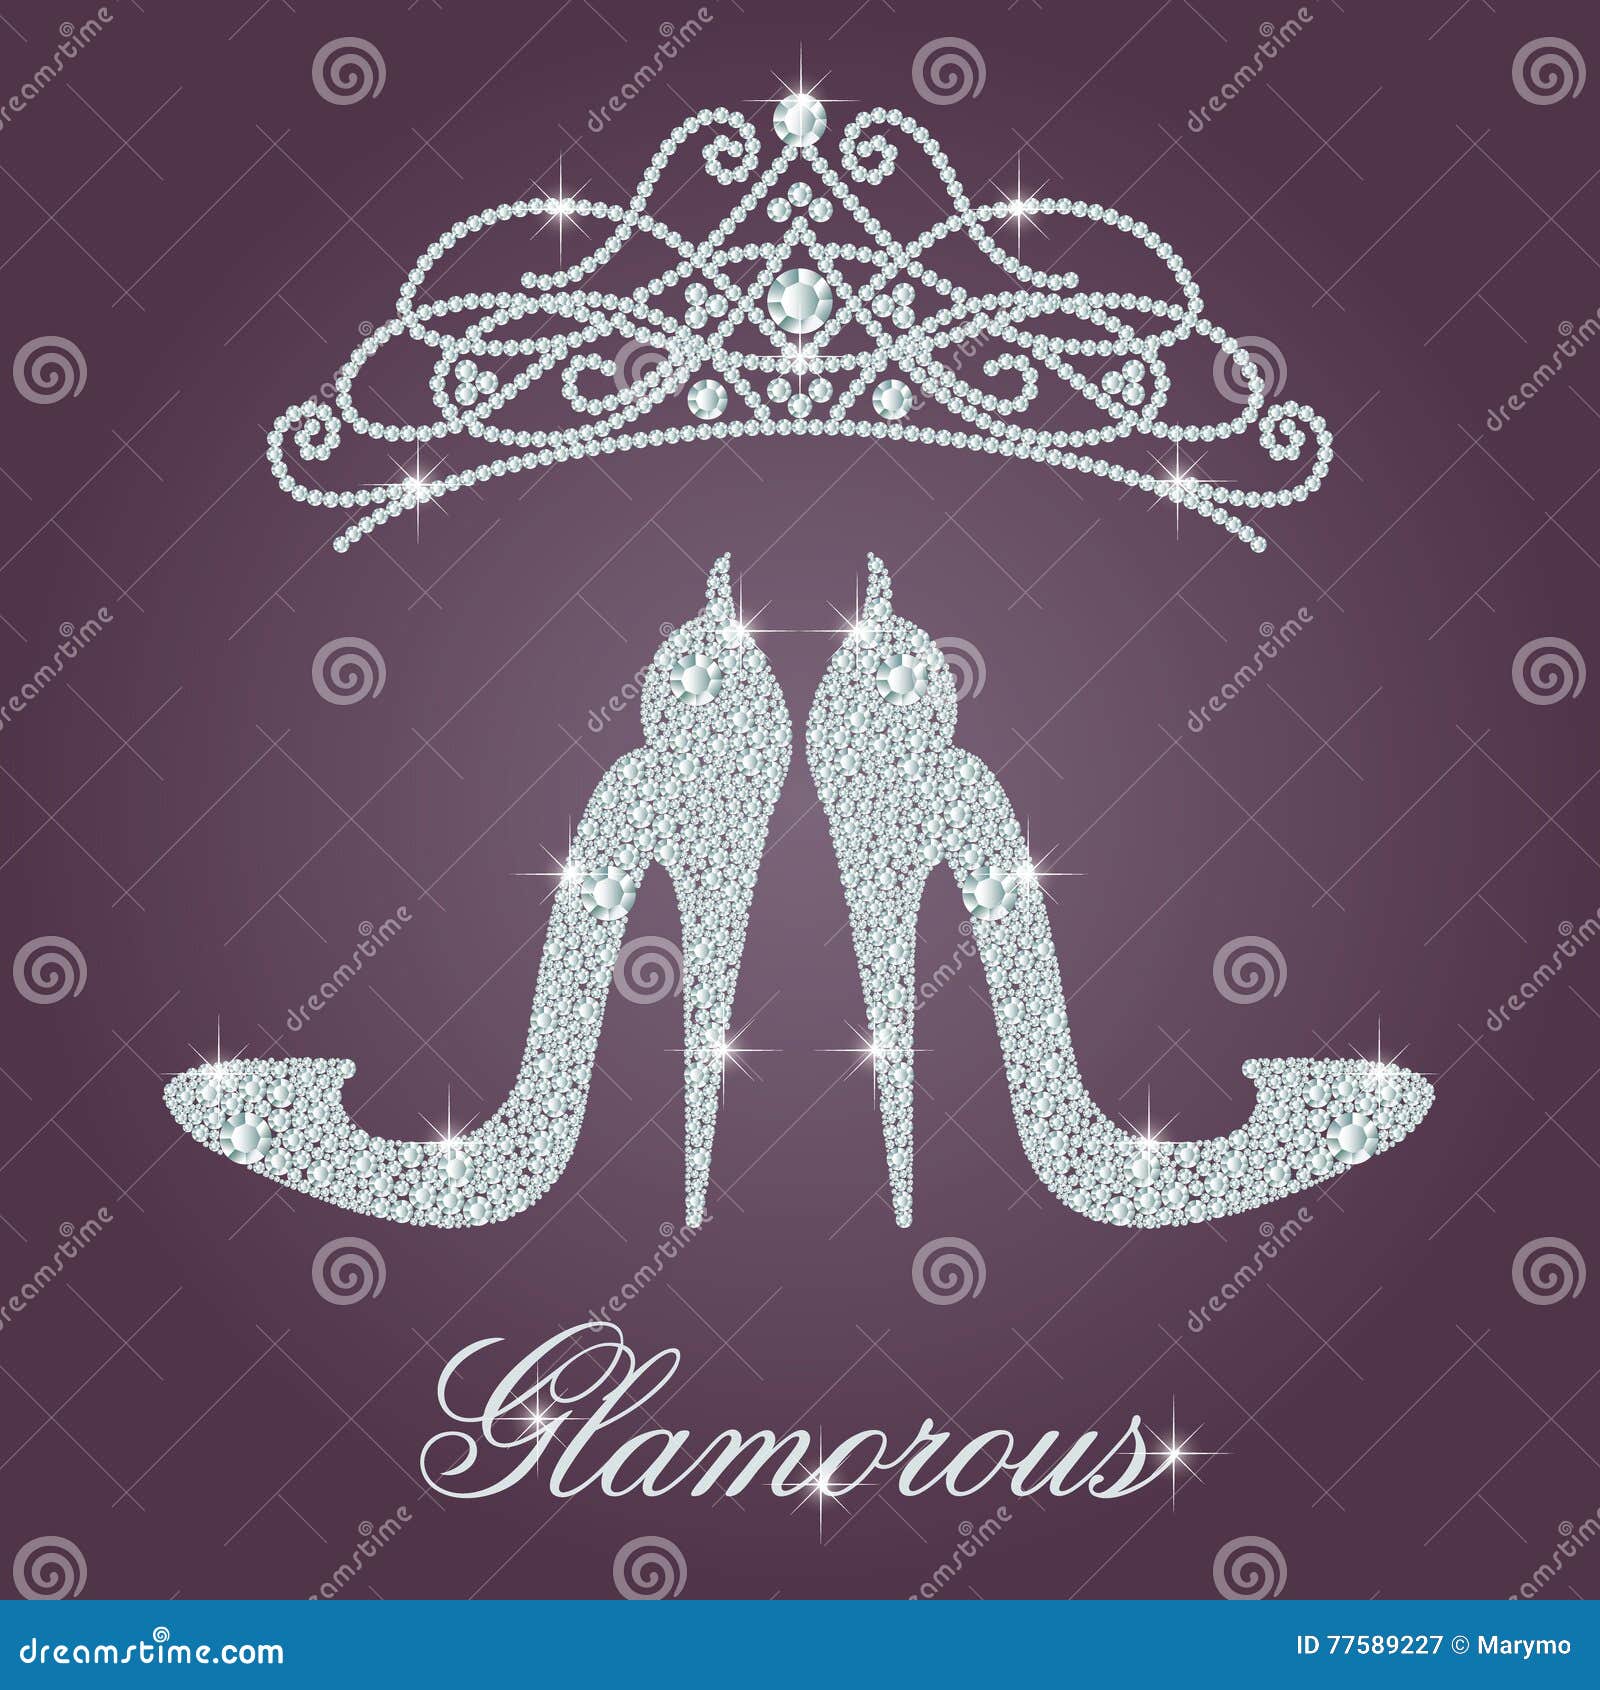 Diva Calligraphy And Highheel Shoe With Crown Stock Illustration